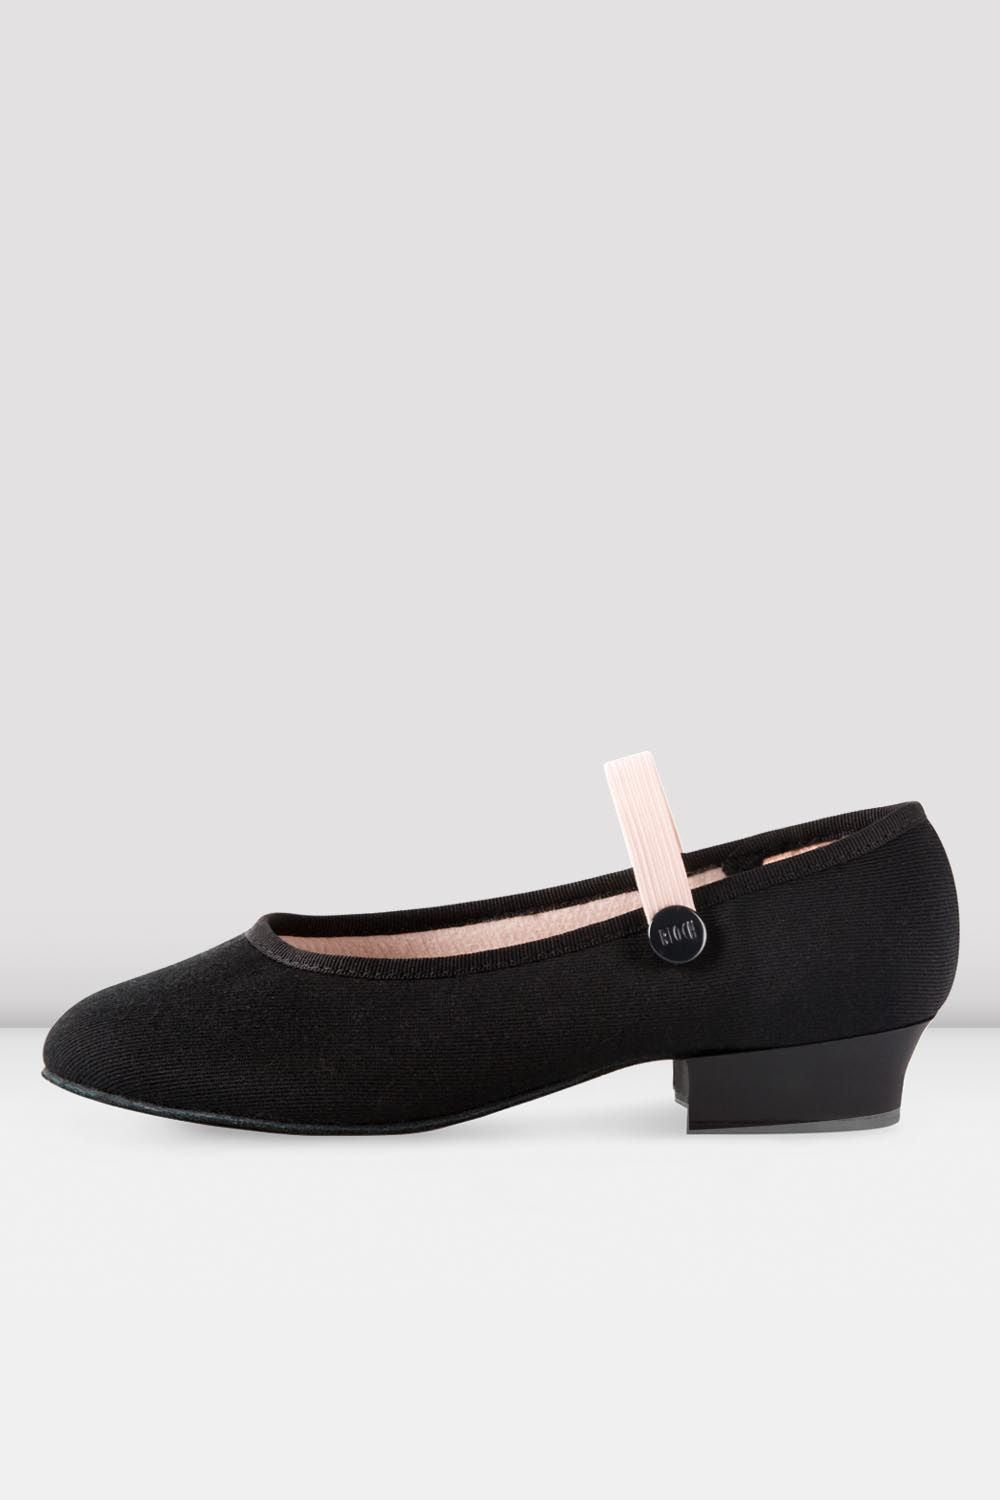 Accent Low Heel Character Shoes - The Dance Shop